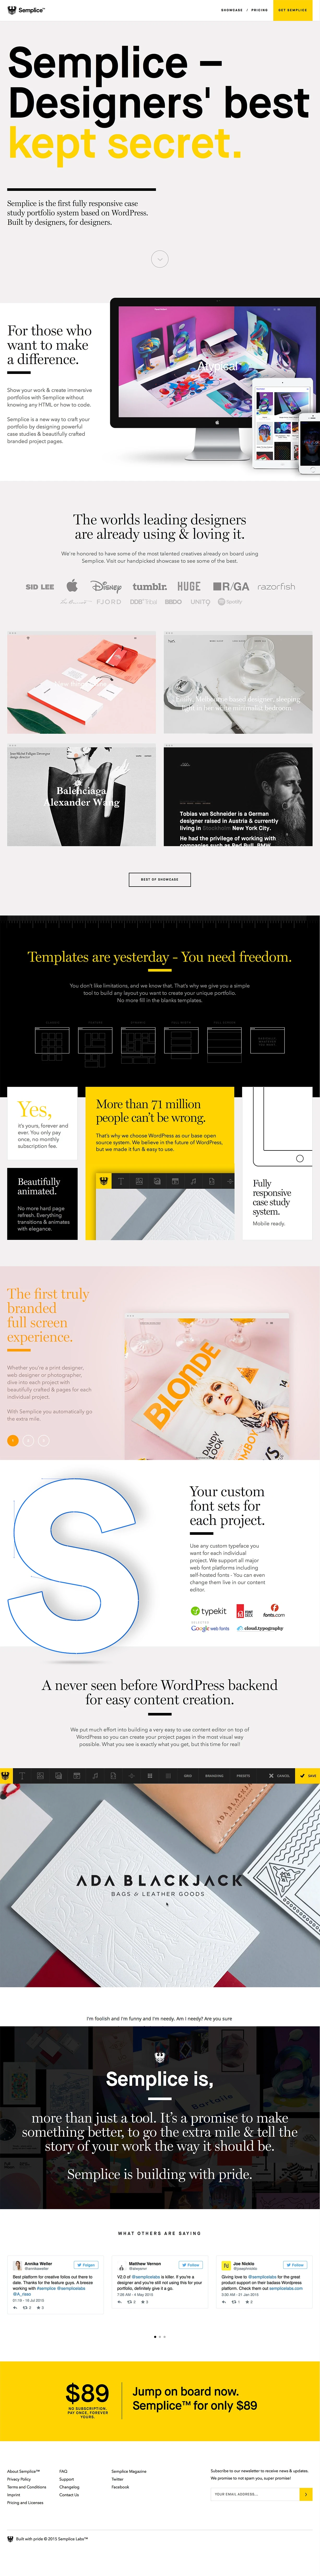 Semplice Landing Page Example: With Semplice you can build fully responsive case studies & custom branded project pages with just a few clicks.